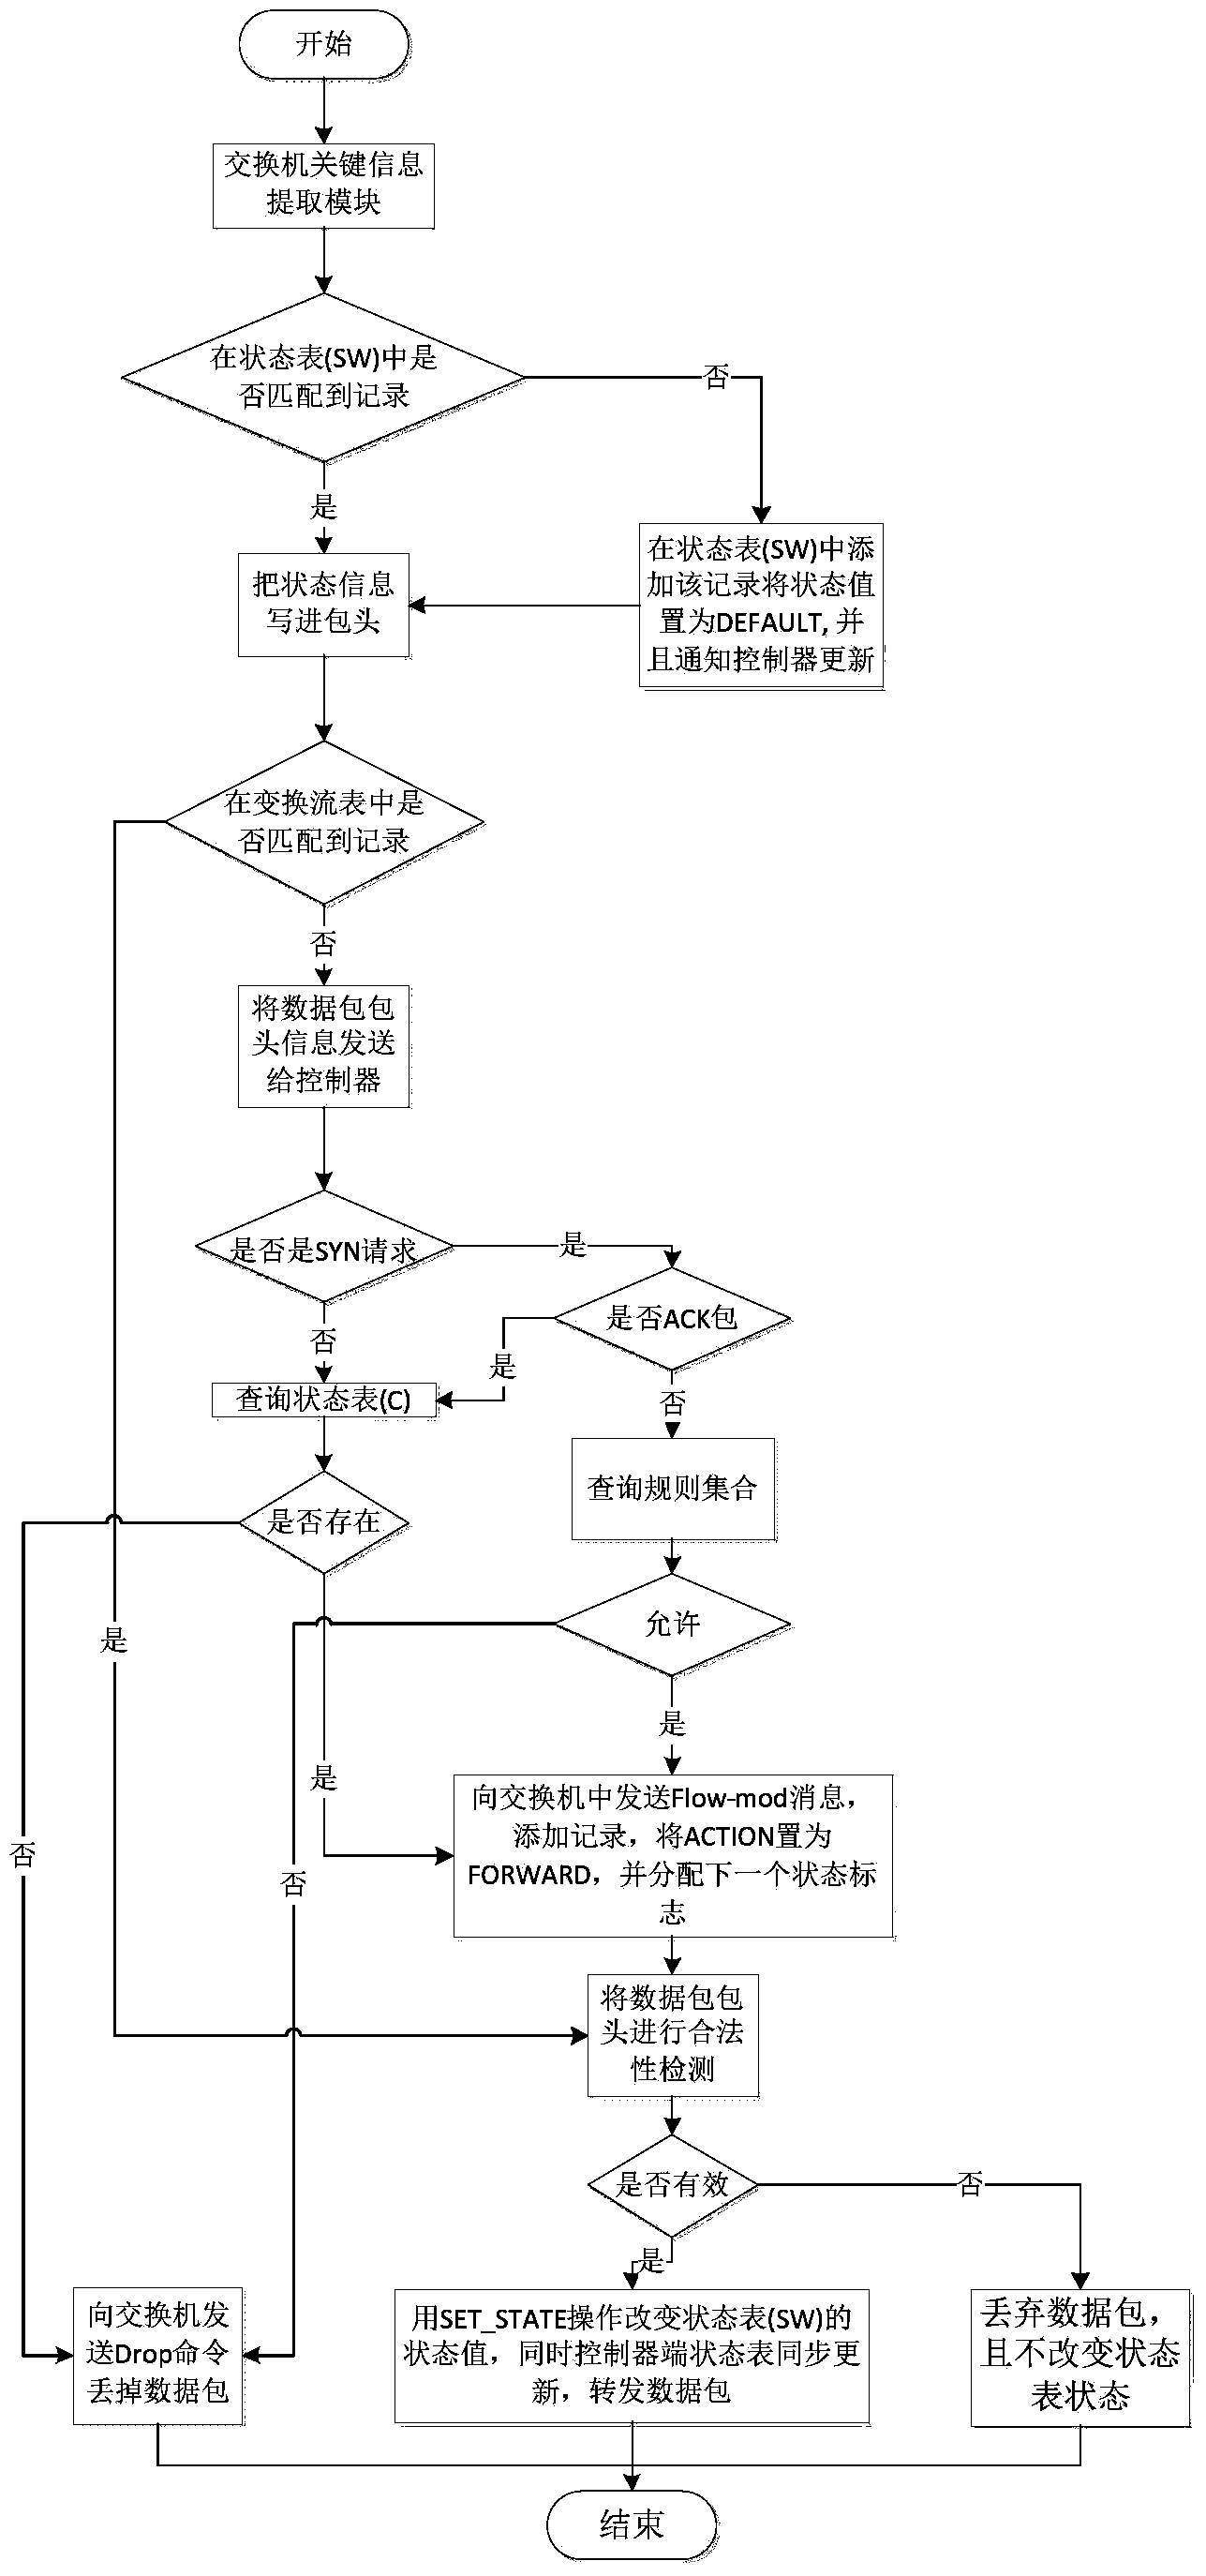 SDN (self-defending network) firewall state detecting method and system based on OpenFlow protocol